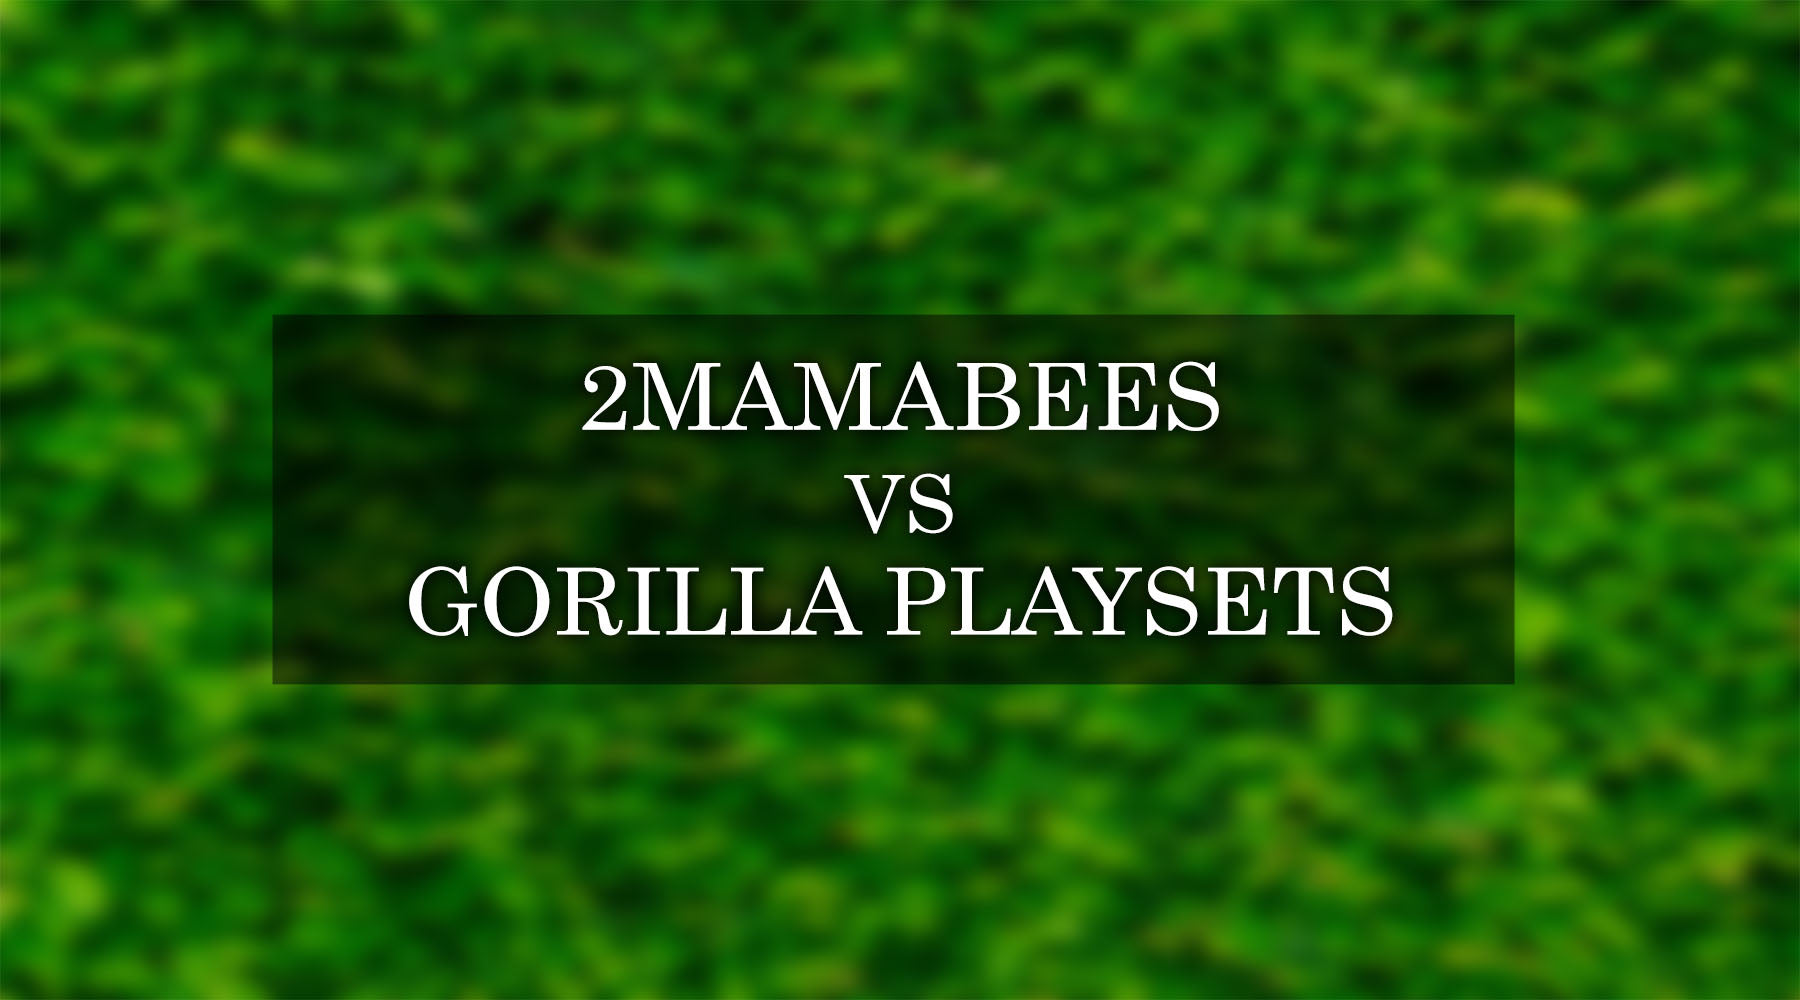 2MamaBees vs Gorilla Playsets: A Detailed Comparison